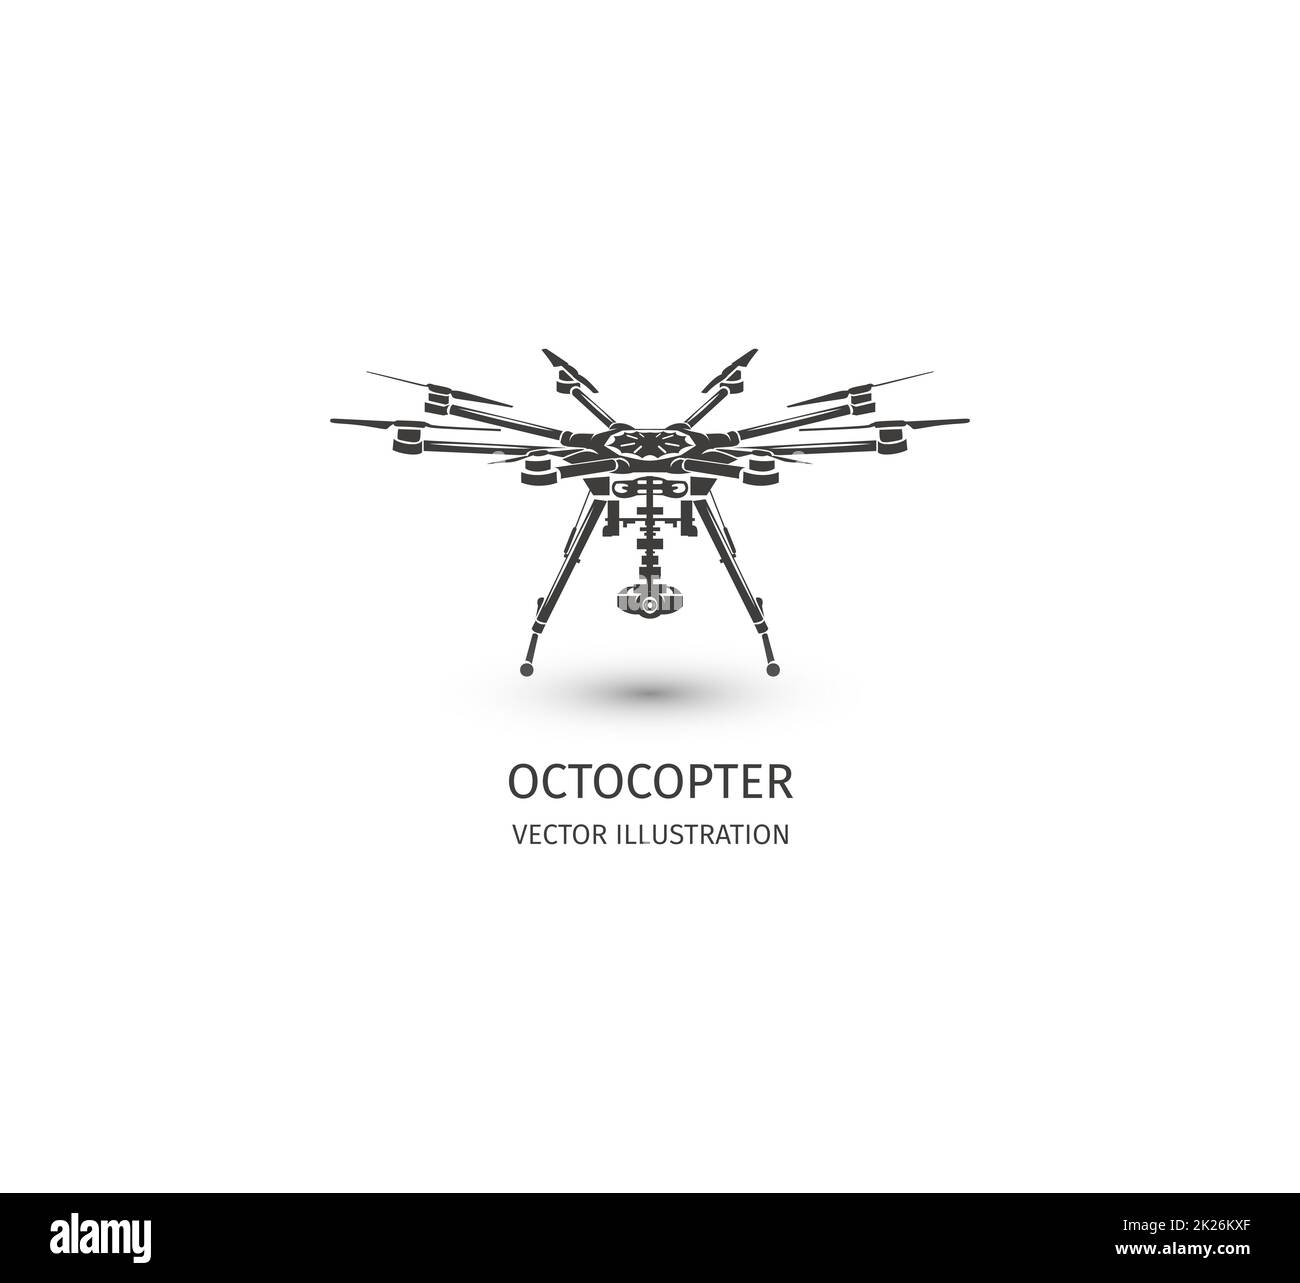 Isolated rc drone logo on white. UAV technology logotype. Unmanned aerial vehicle icon. Remote control device sign. Surveillance vision multirotor. Vector octocopter illustration. Stock Photo